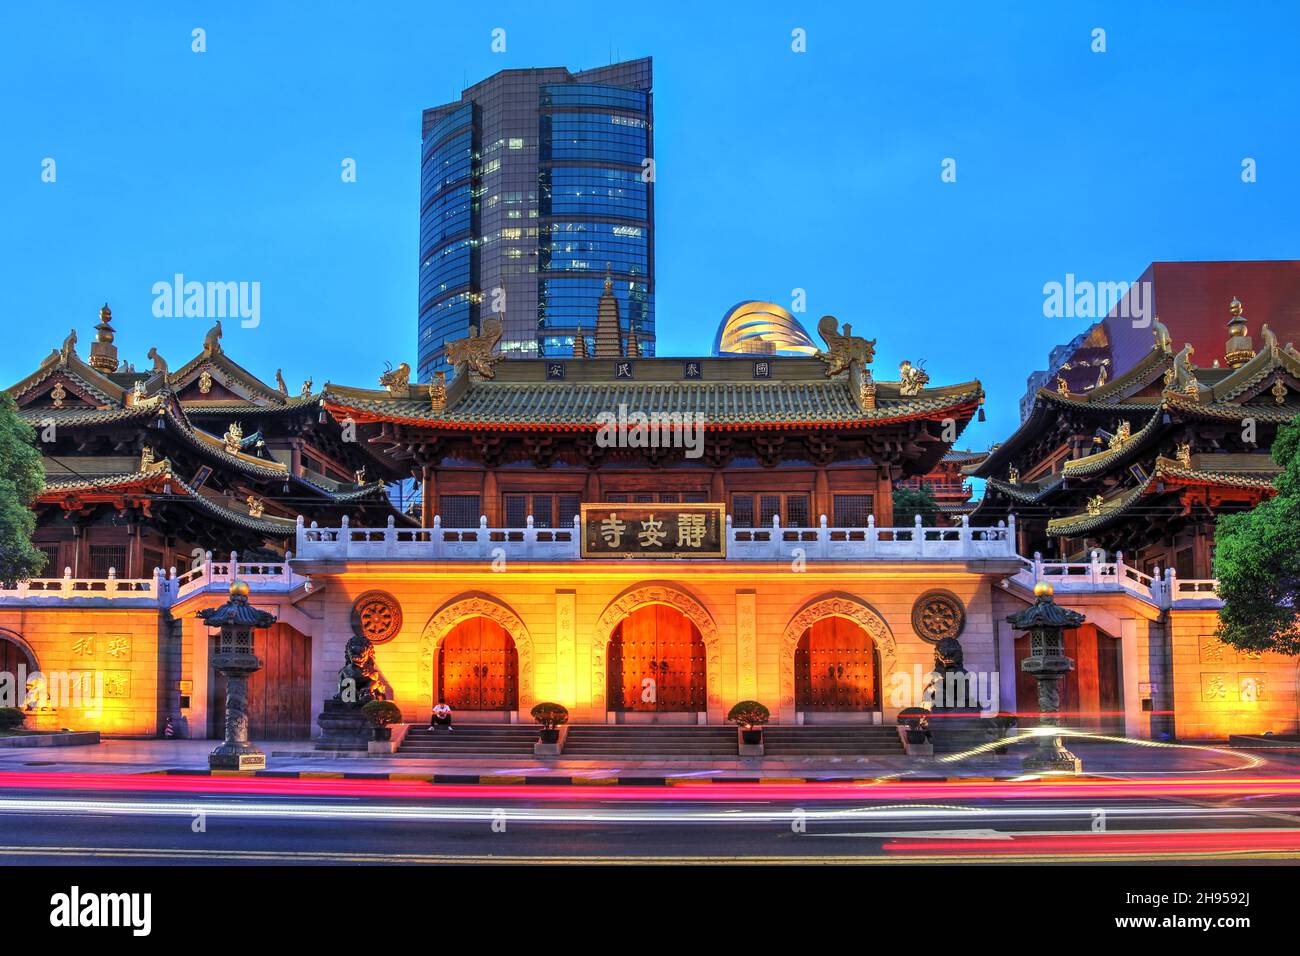 Street view at night of the main entrance to Jing'an Buddhist Temple in Shanghai, China. Stock Photo